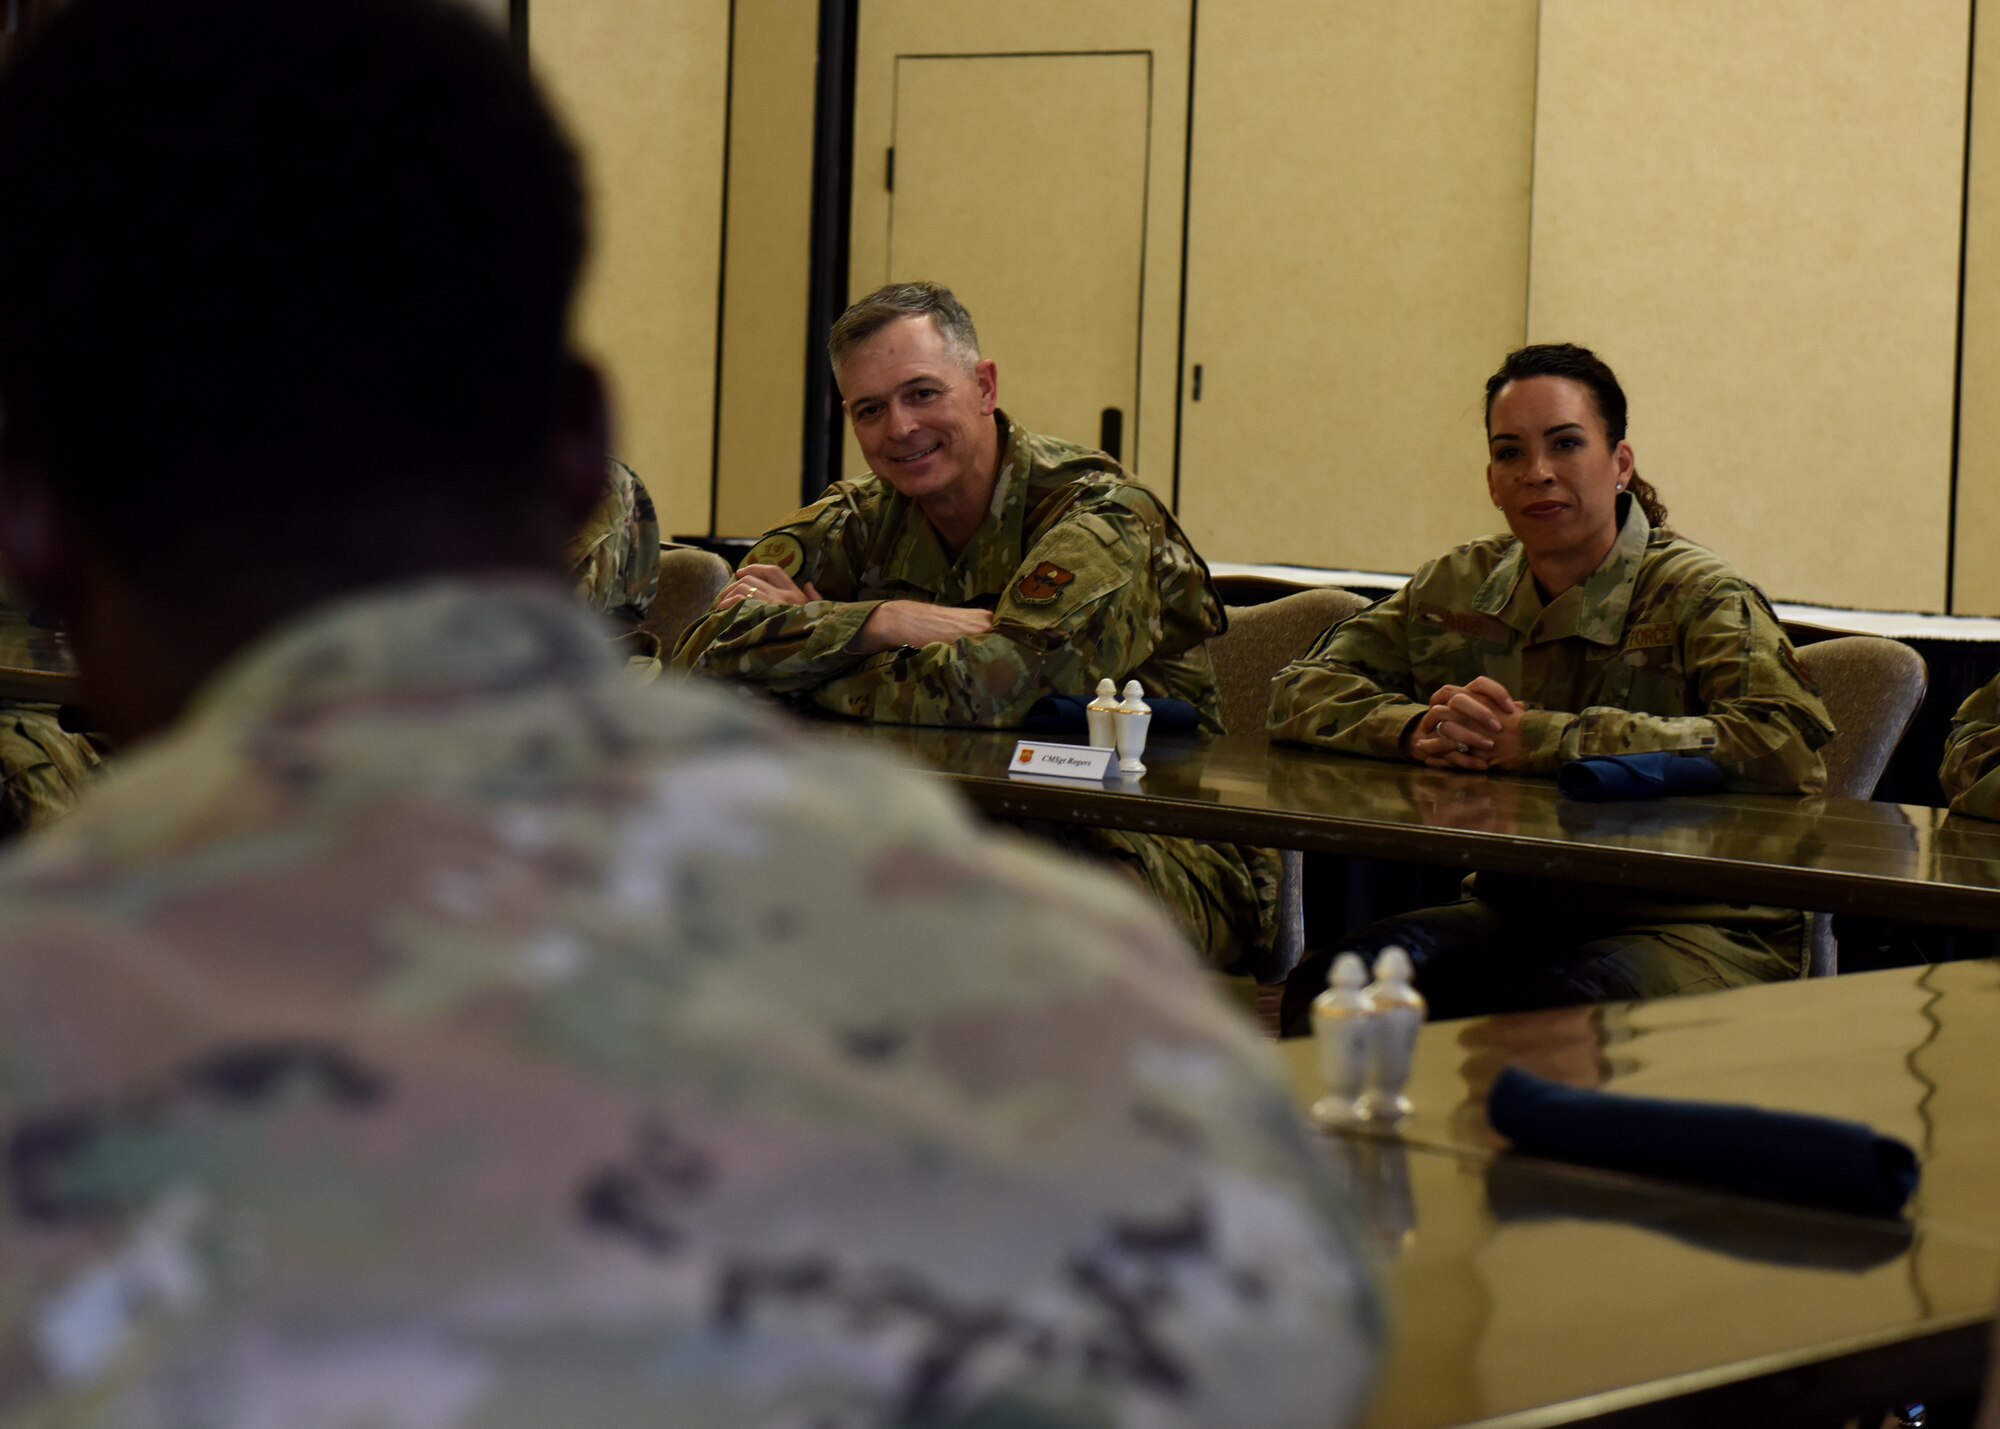 U.S. Air Force Maj. Gen. Craig Wills, left, 19th Air Force commander, and U.S. Air Force Chief Master Sgt. Kristina Rogers, 19th AF command chief, speak with Airmen assigned to the 56th Fighter Wing during a luncheon, June 28, 2021, at Luke Air Force Base, Arizona. During the luncheon, Airmen discussed with senior leadership various topics such as GI Bill benefits, mental health, and diversity and inclusion within the Air Force. Leadership from the 19th AF visited Luke AFB to engage with the 56th Fighter Wing and gain a better understanding of the successes and challenges faced by the wing. (U.S. Air Force photo by Tech. Sgt. Franklin R. Ramos)